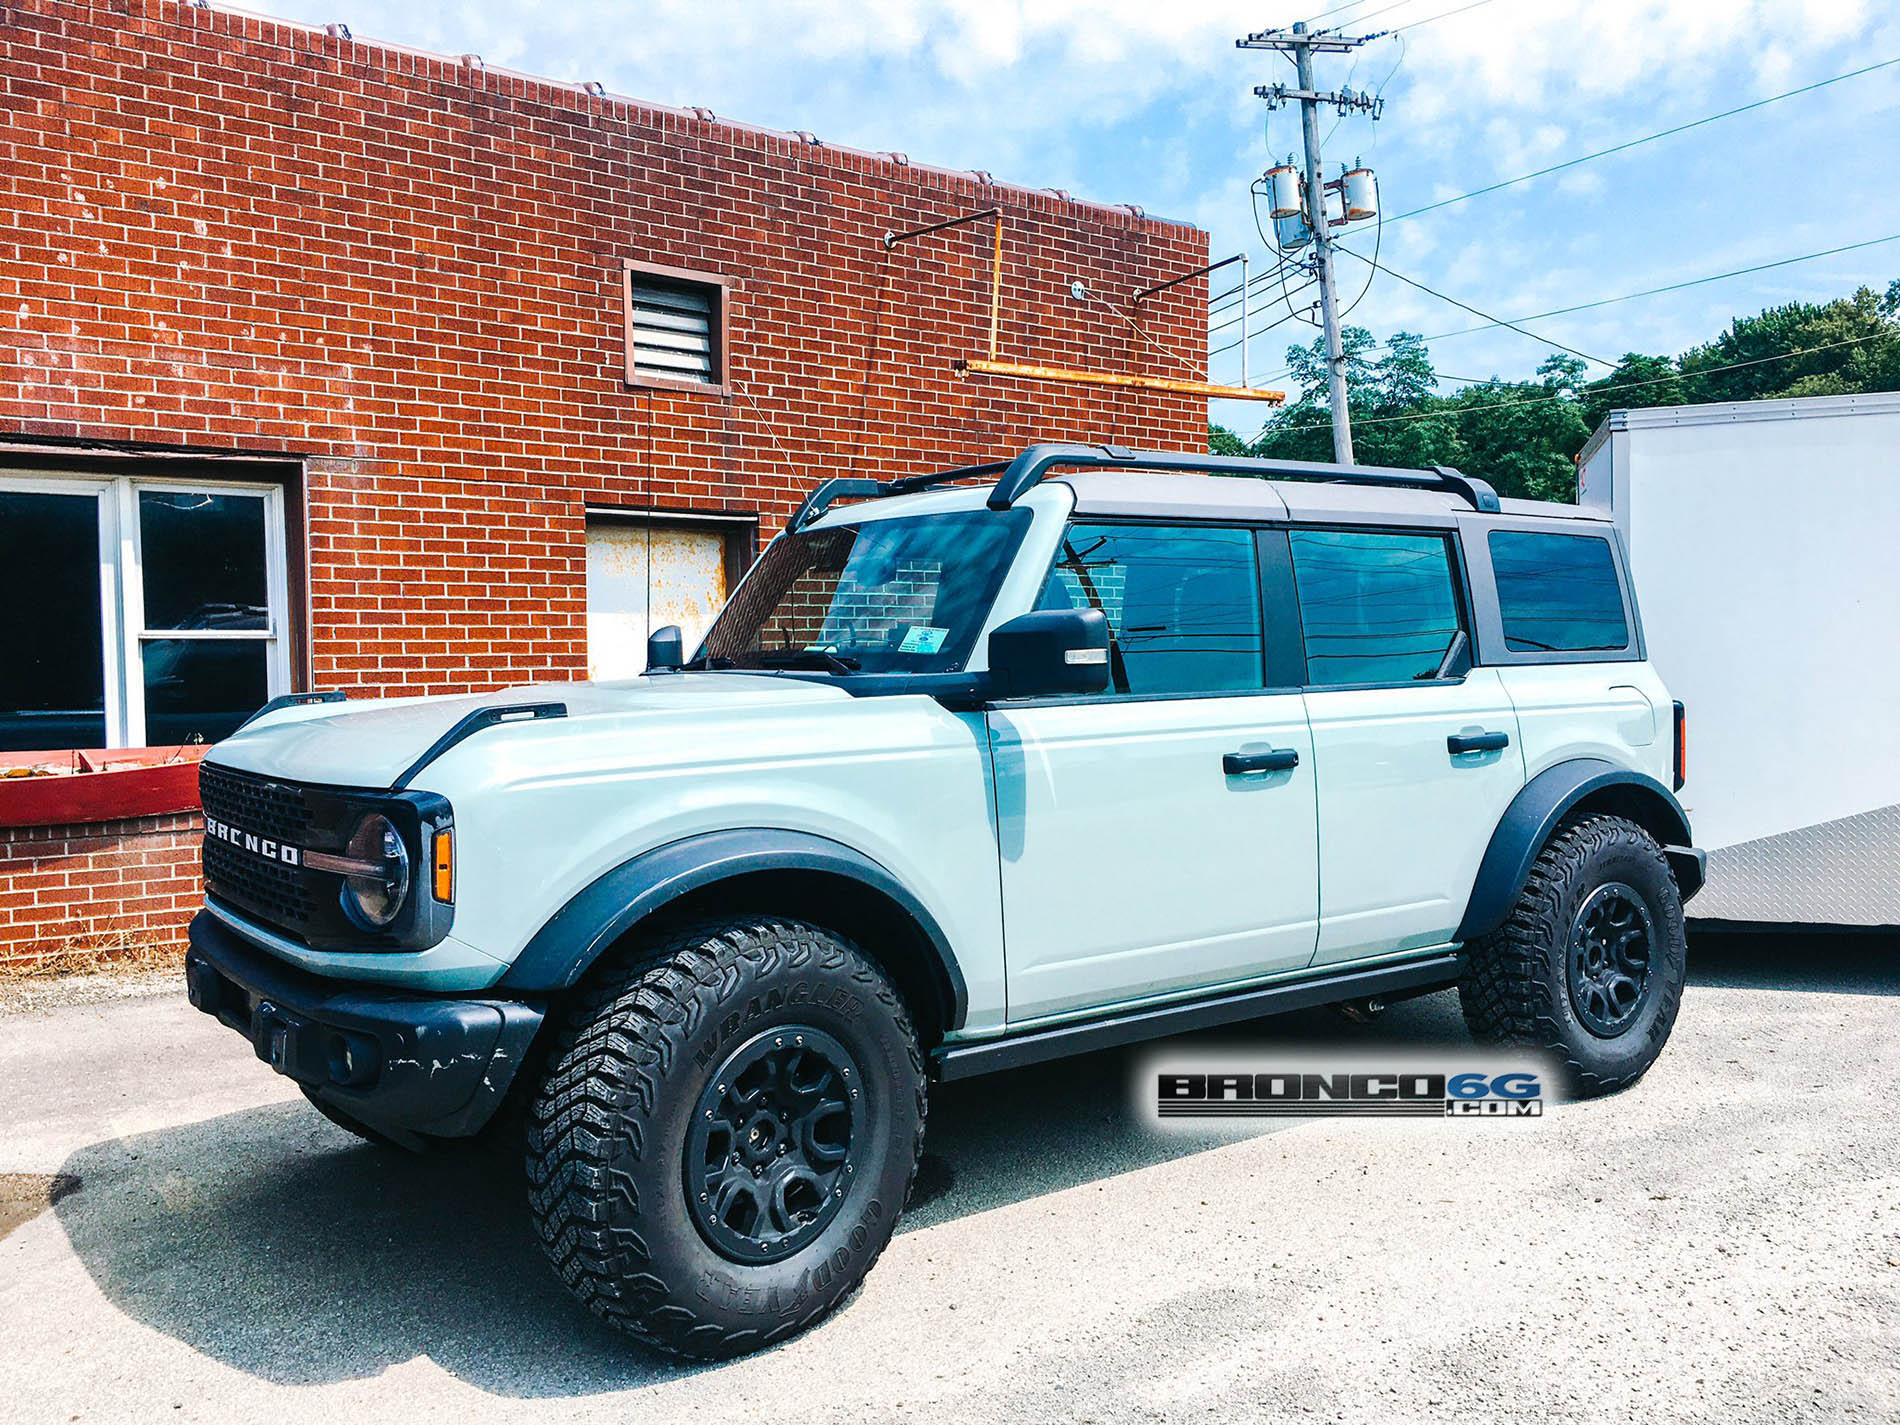 Ford Bronco 4 Door Sasquatch Picture Thread (No CGI, only real pics) 9CBCC66B-6042-417A-A554-F0CD7C5969C3